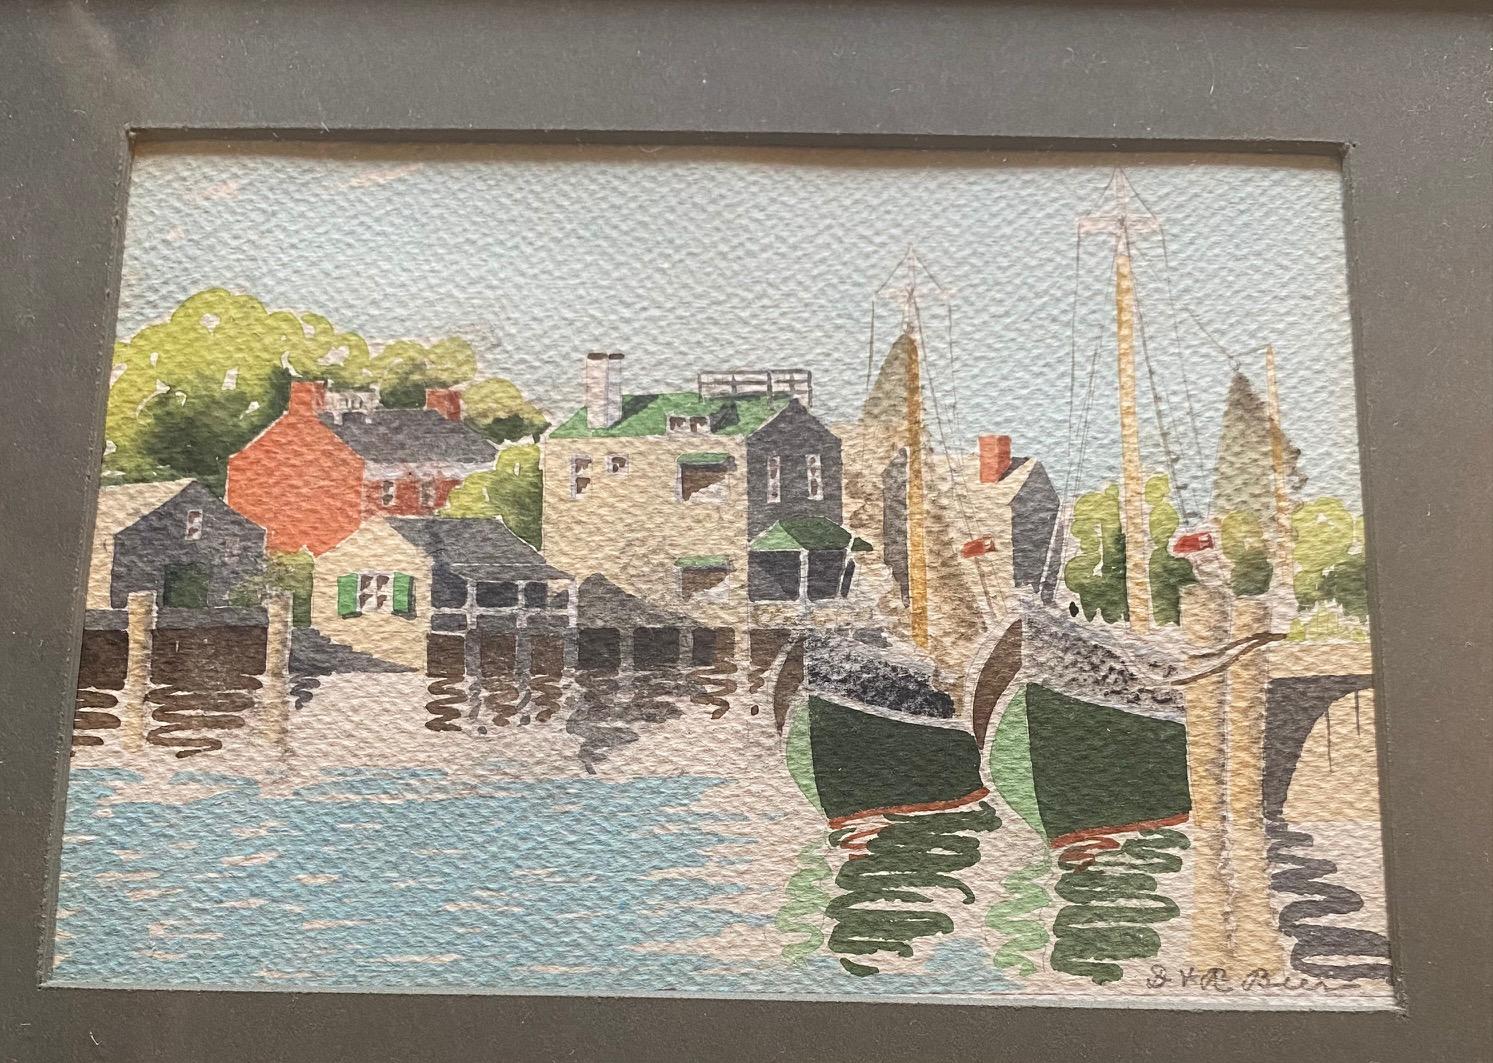 Vintage Nantucket old north Wharf watercolor by Doris & Richard Beer, circa 1940, a watercolor on paper view of Old North Wharf, signed in pencil power right, and retaining its original printed description by the Beers. This is a larger painting